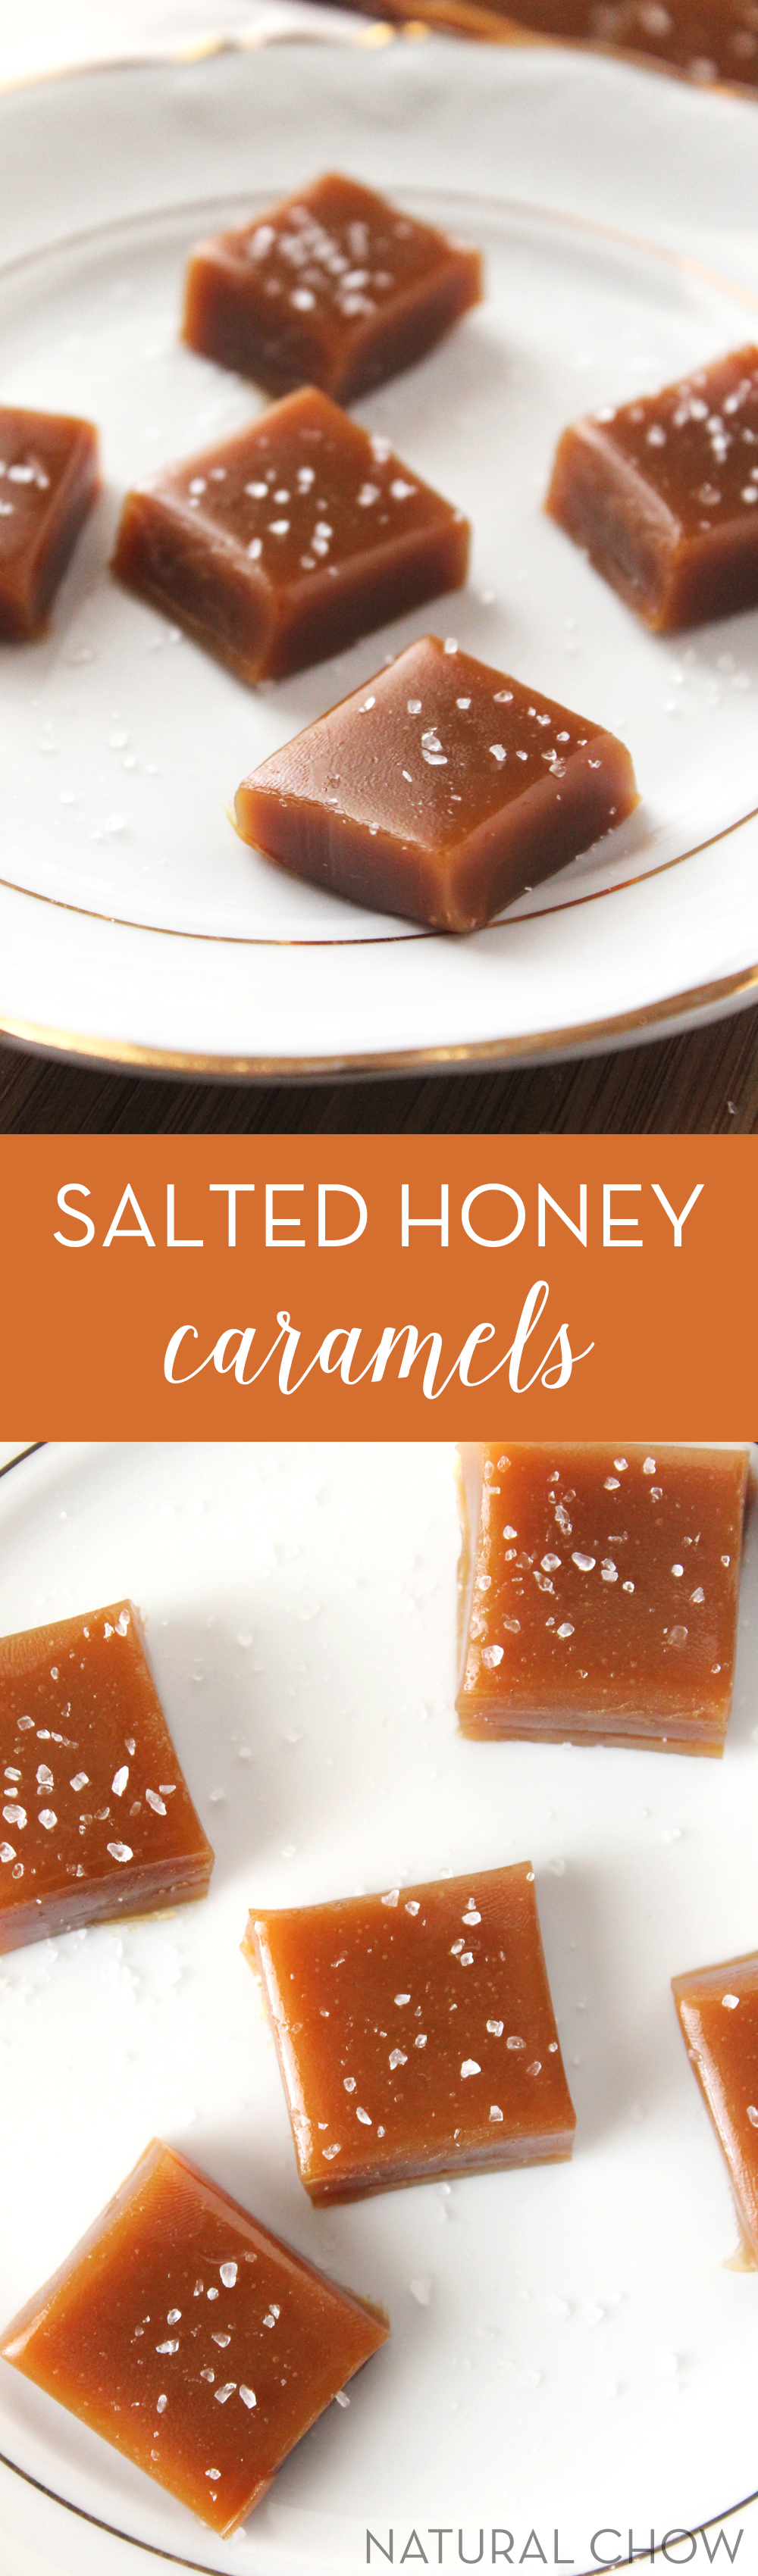 These homemade salted honey caramels are melt-in-your-mouth luscious, chewy, and heavenly. They make great gifts and are WAY healthier than the storebought kind.